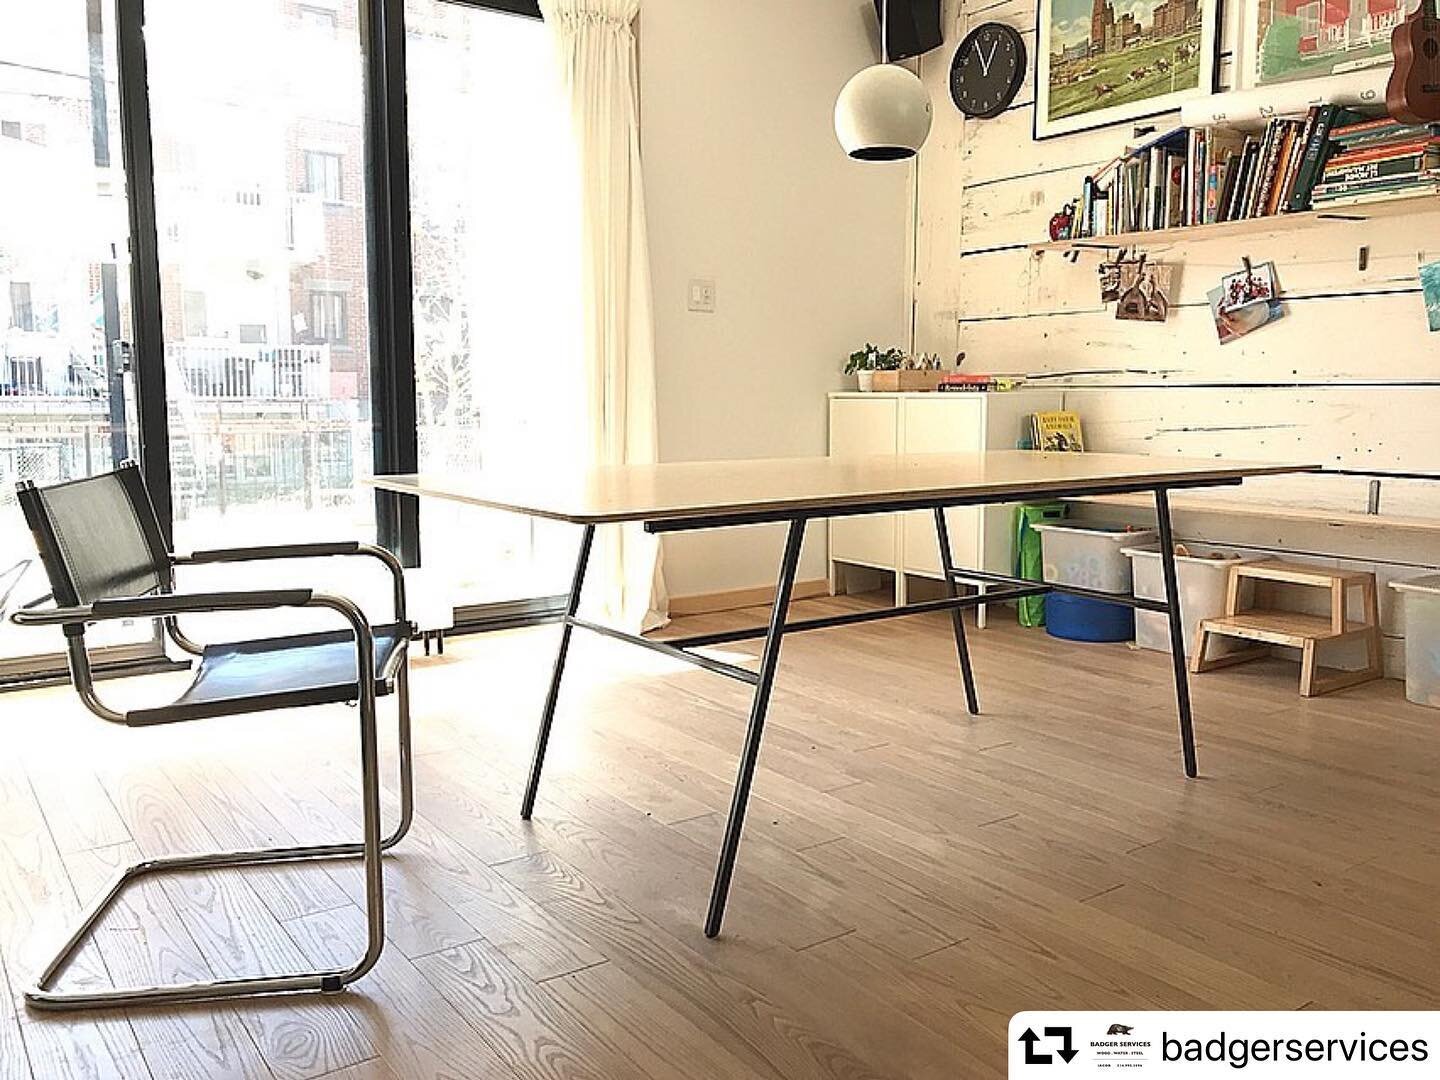 Thank you @badgerservices and @brodskyandbond for another great collaboration! This table sure is getting a lot of field testing! 
#tabledesign #russianply #steeltube #tabledecor #montrealdesigner